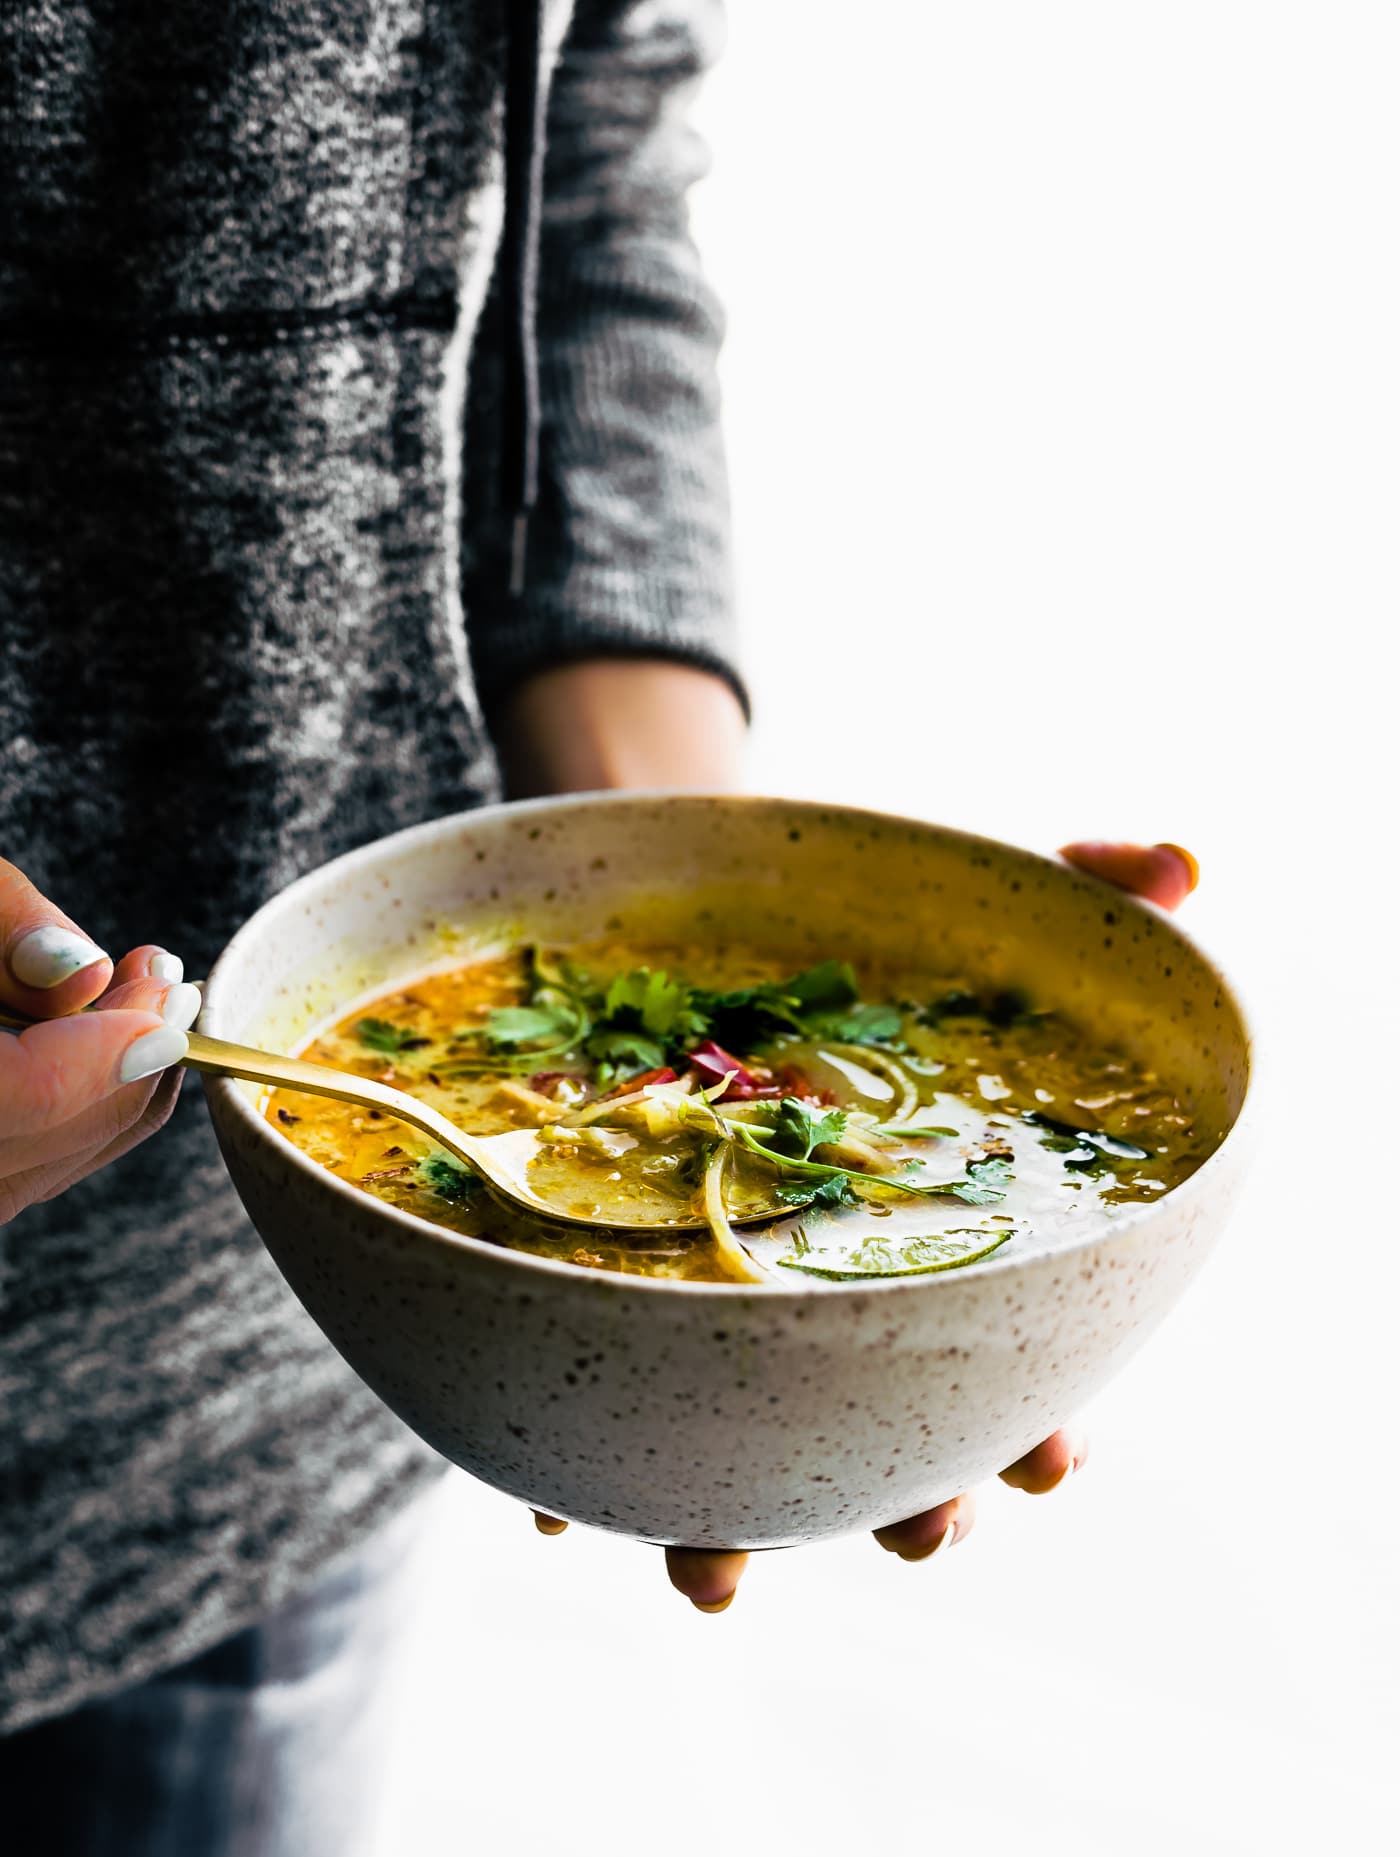 A stone bowl filled with nourishing Thai coconut cabbage soup being held by two hands, a spoon in soup